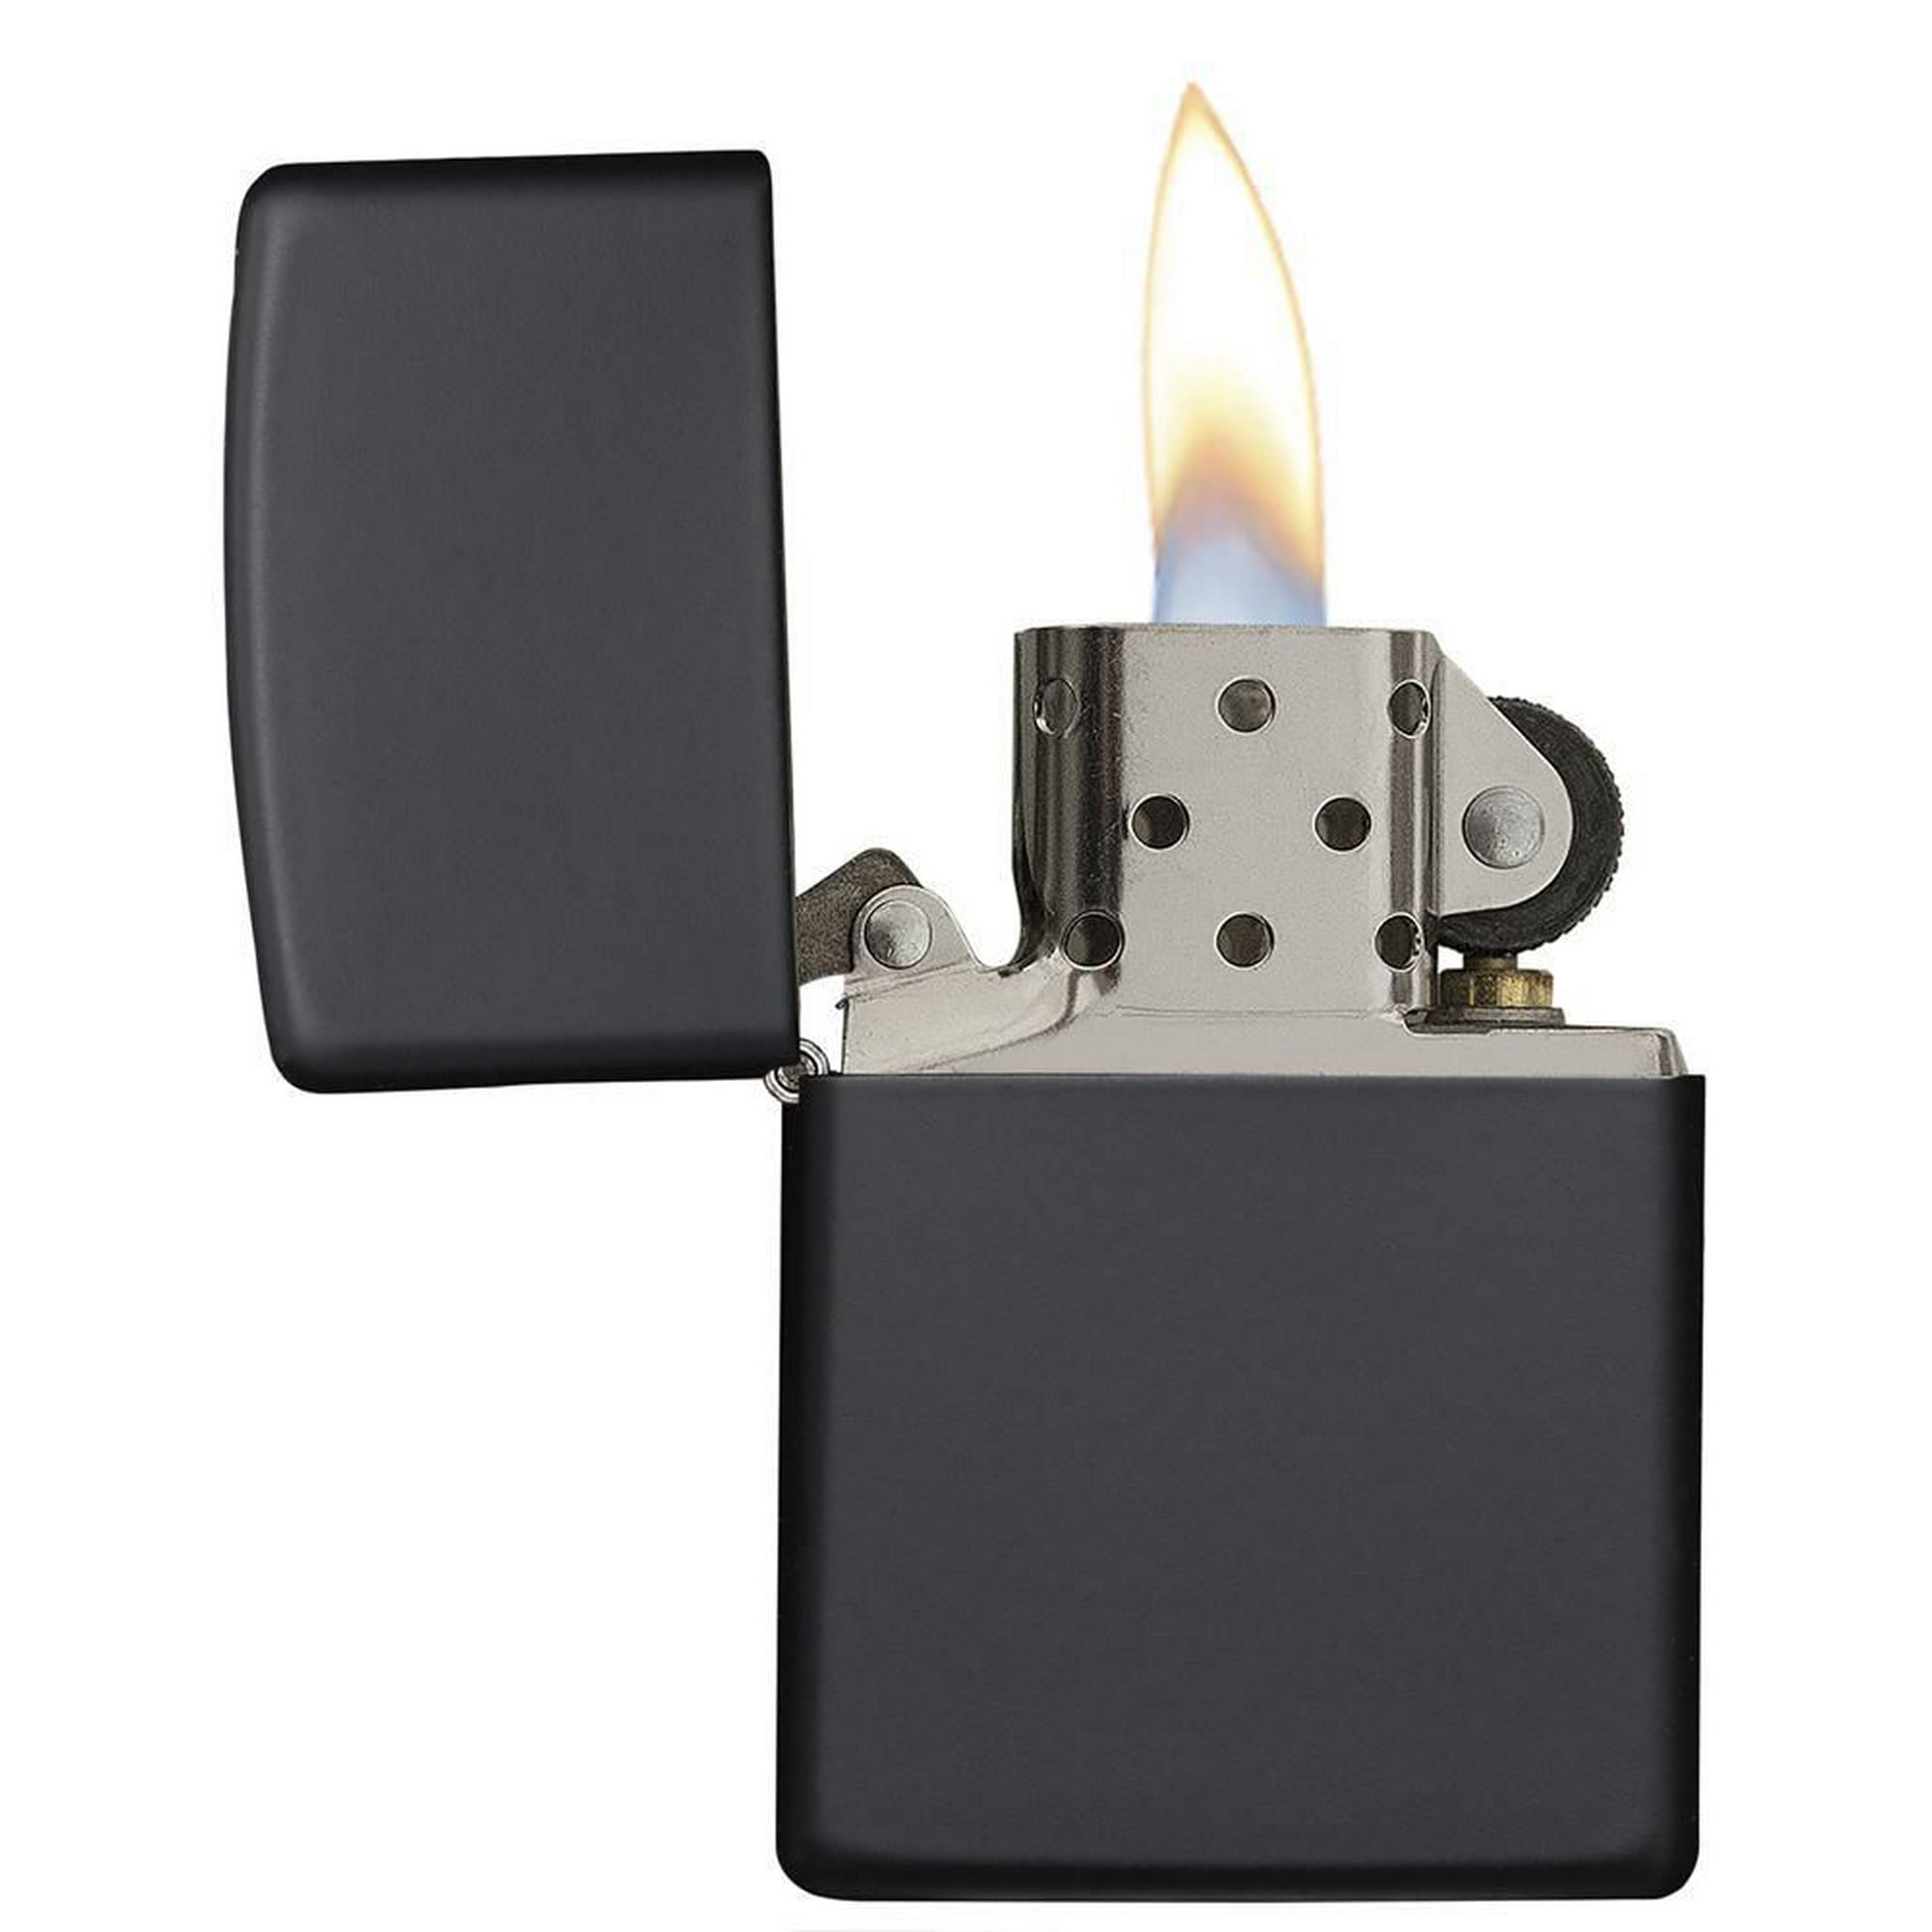 Kit for petrol lighter: Zippo stone with wick